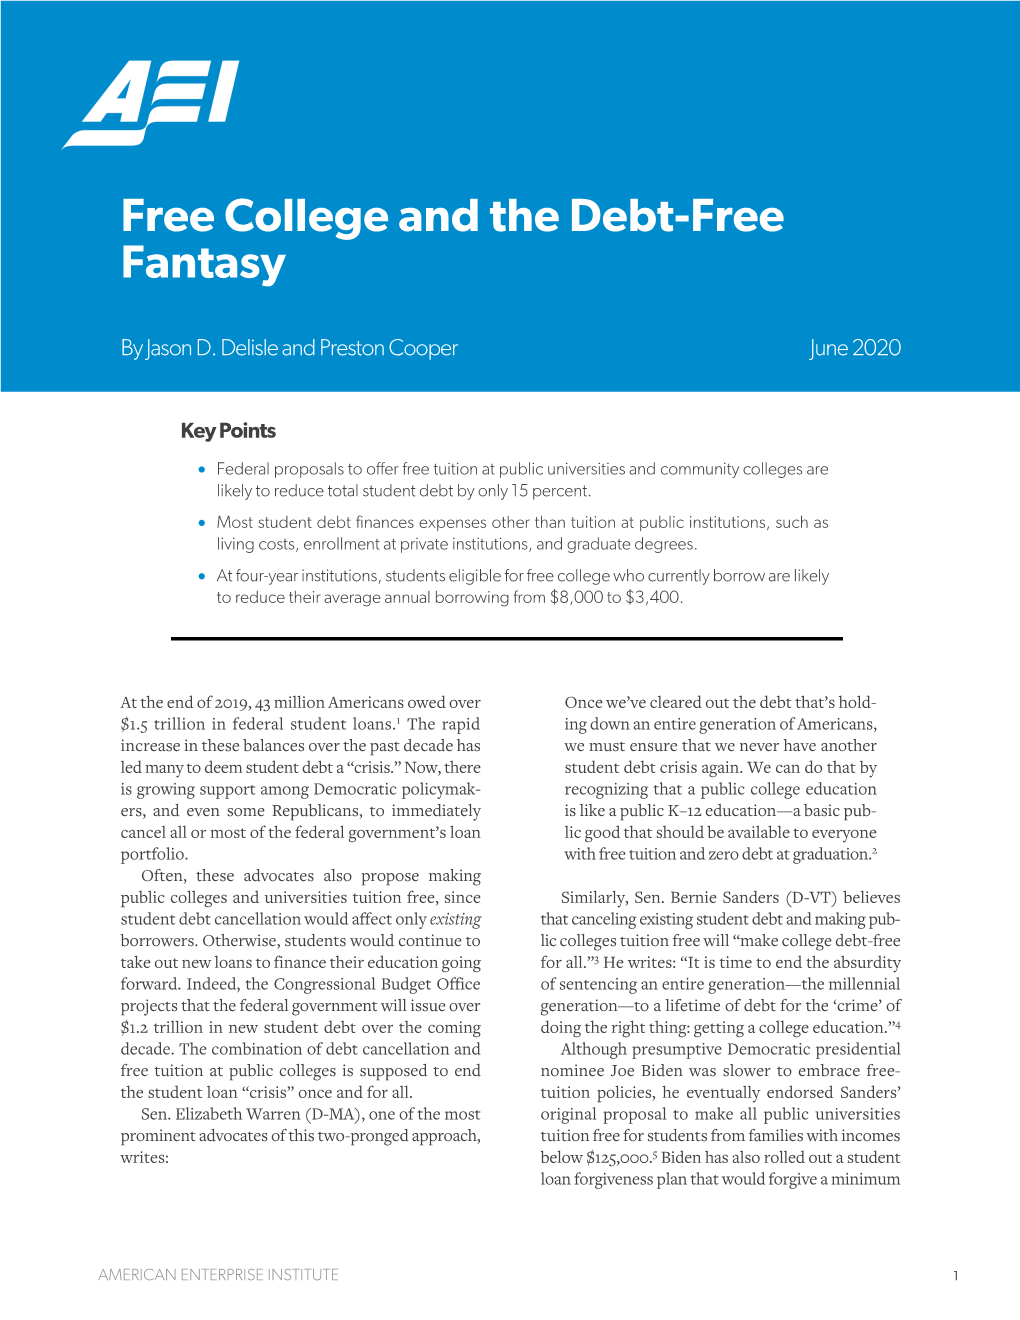 Free College and the Debt-Free Fantasy